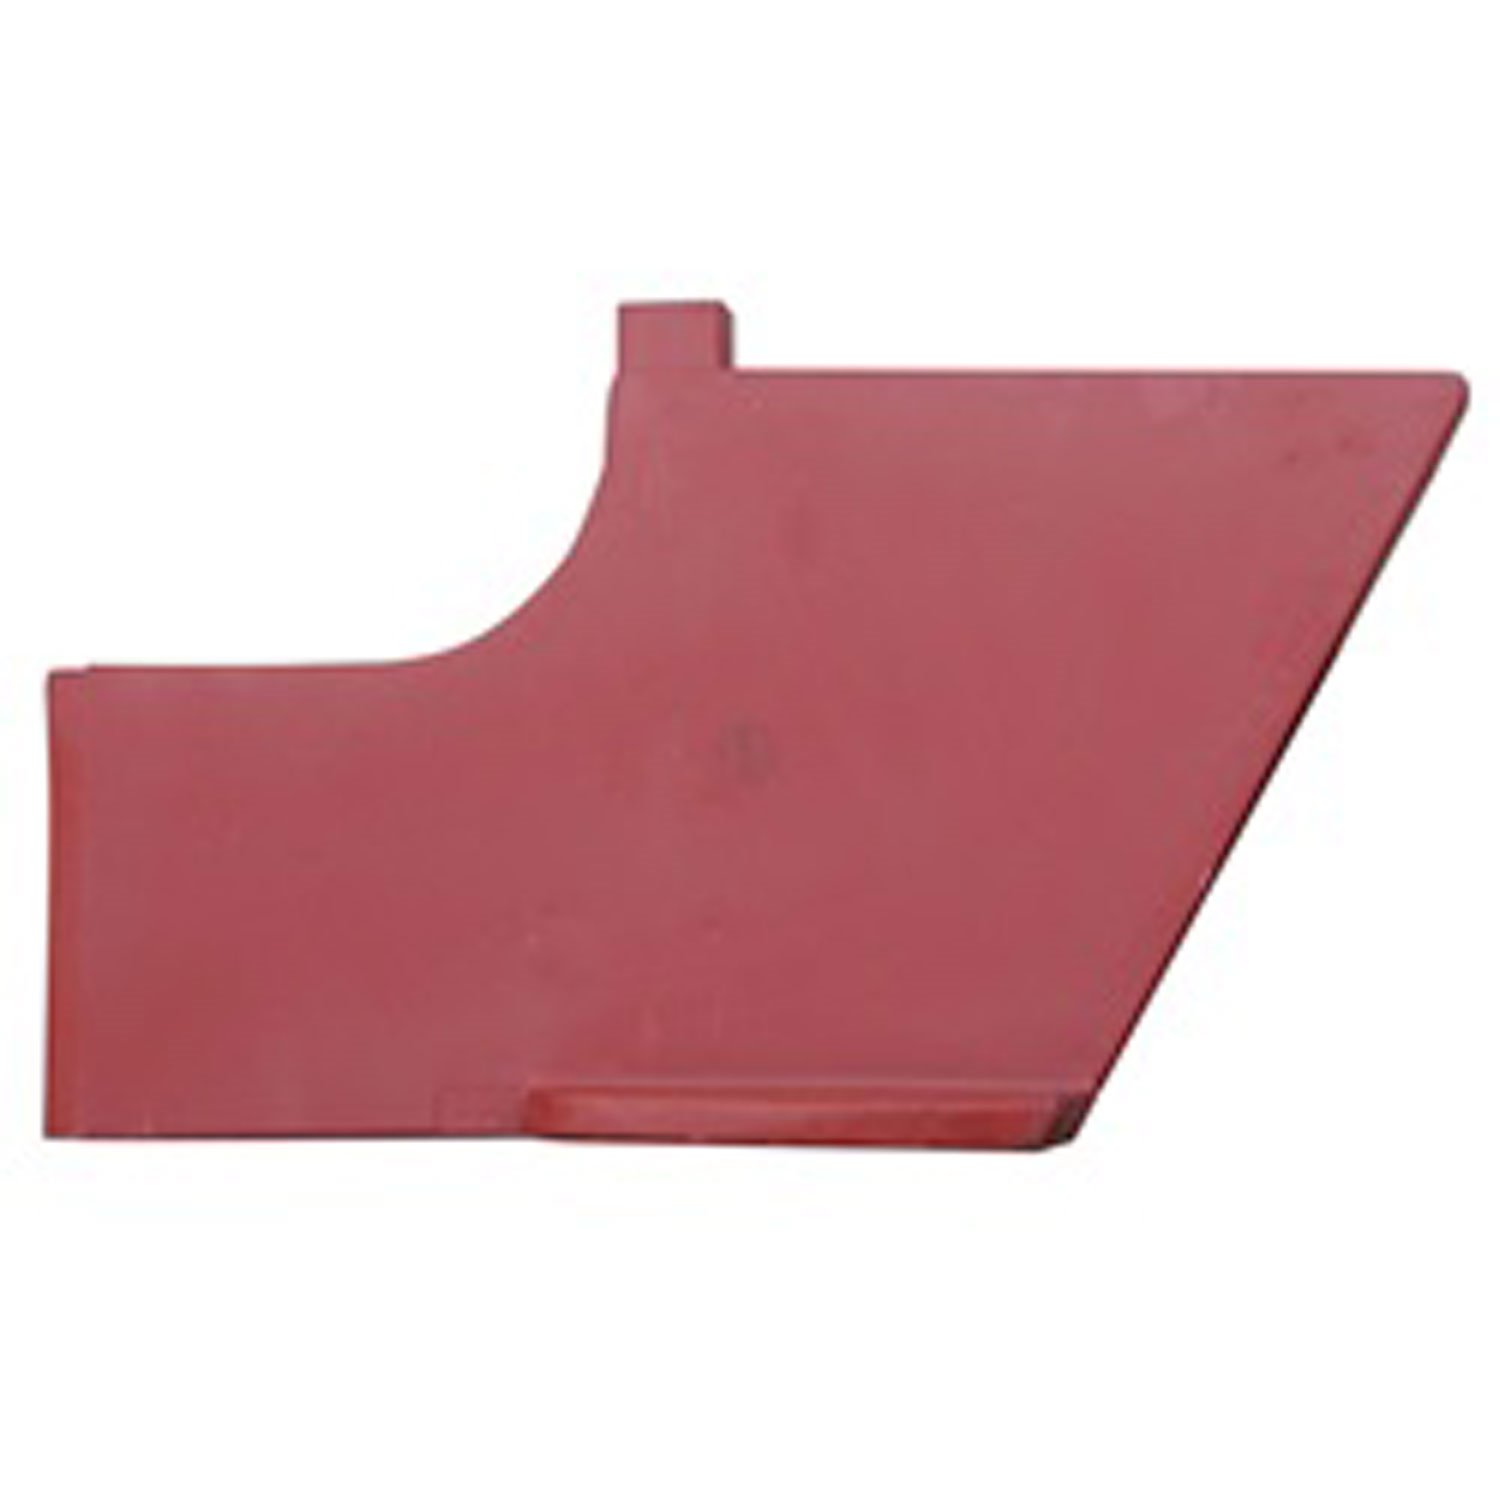 This left cowl side panel from Omix-ADA fits 41-45 Willys MB and Ford GPW. Includes the step.